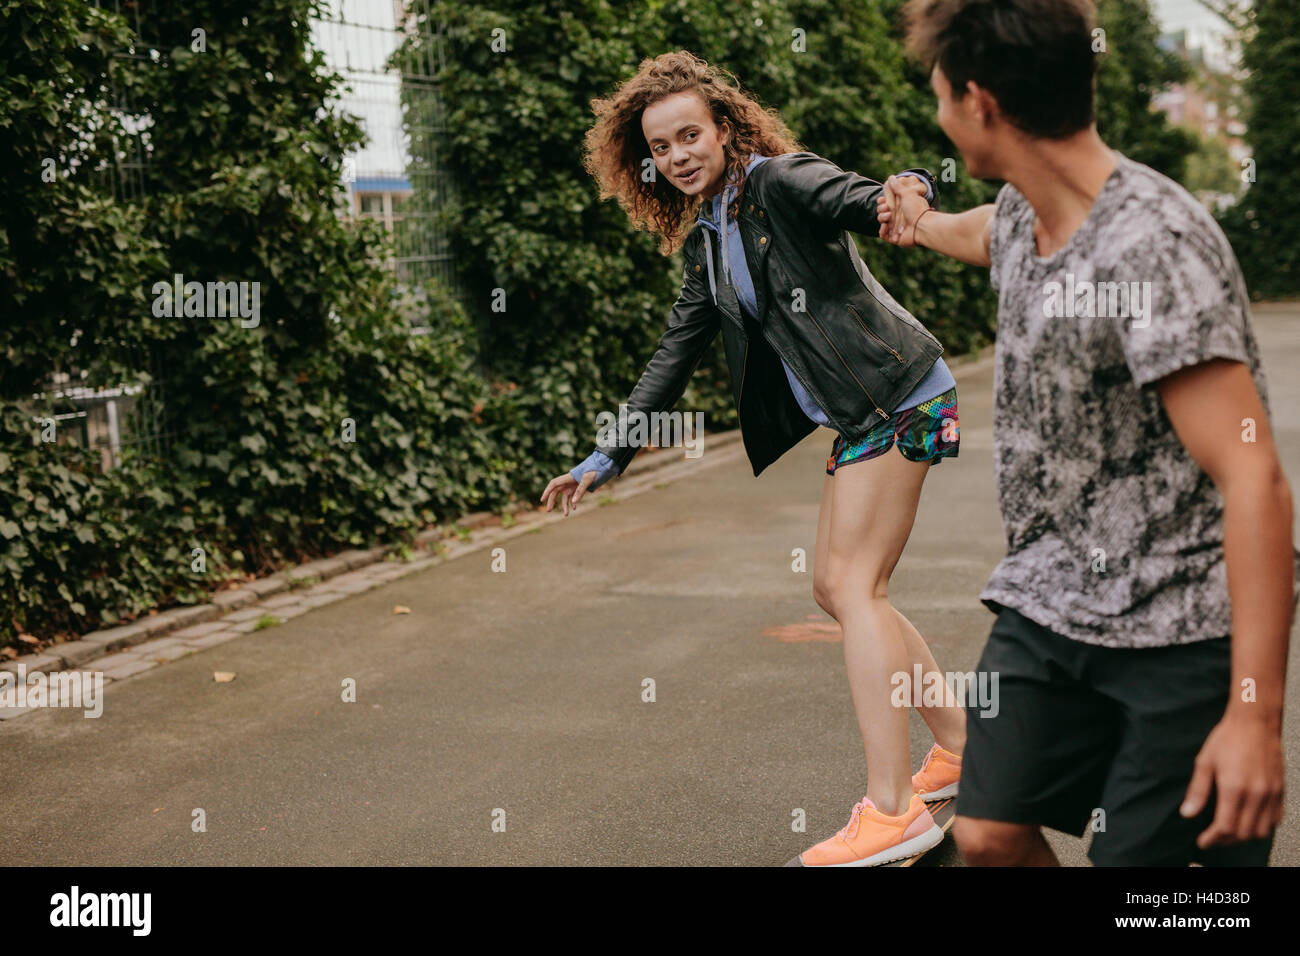 Teenage girl on a skateboard with support from her boyfriend. Woman skating on a basketball court with friend. Stock Photo